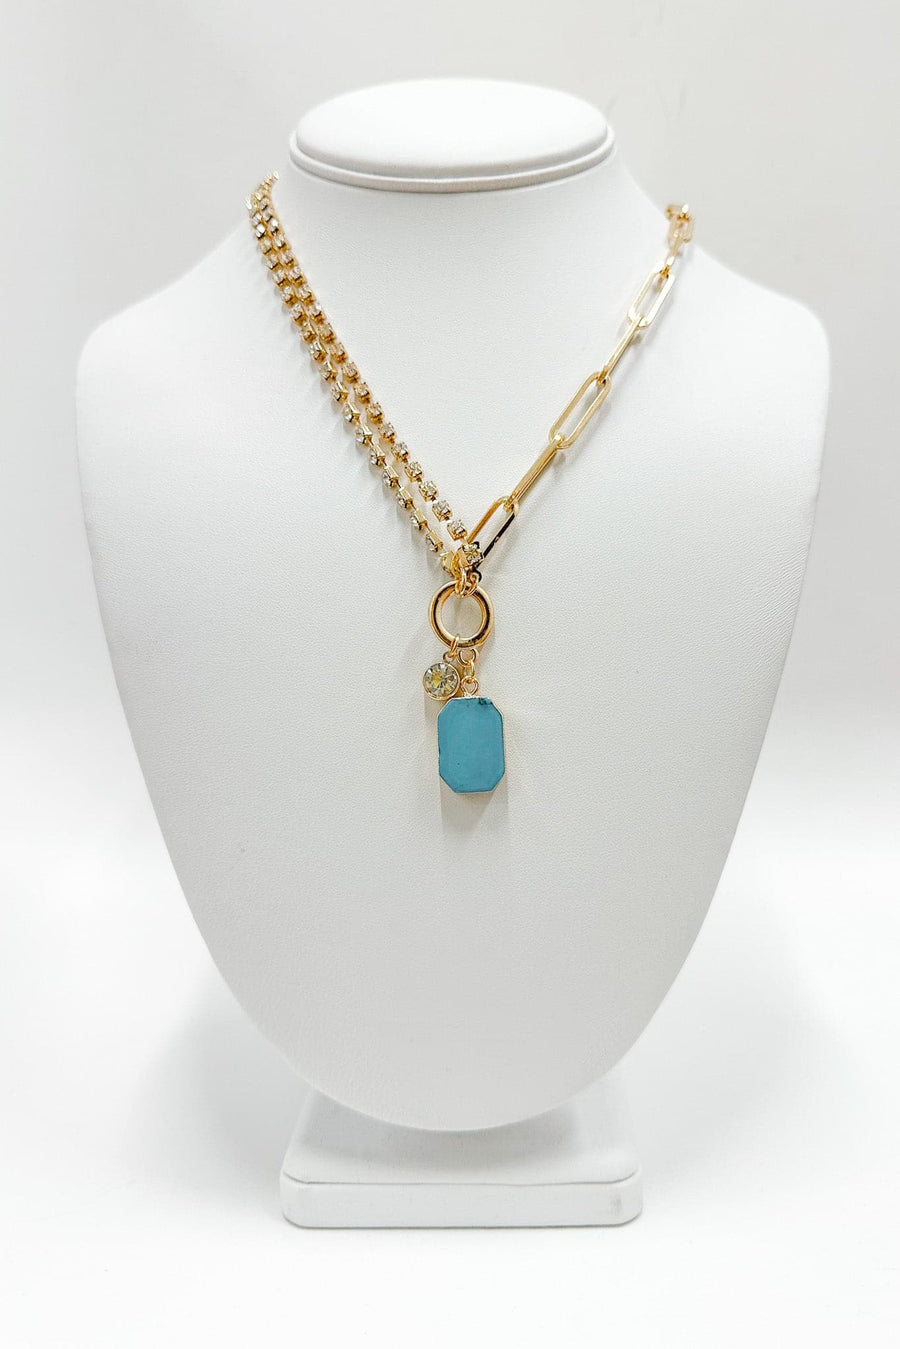 Gold Vibrant Moment Turquoise and Rhinestone Chain Necklace - BACK IN STOCK - Madison and Mallory